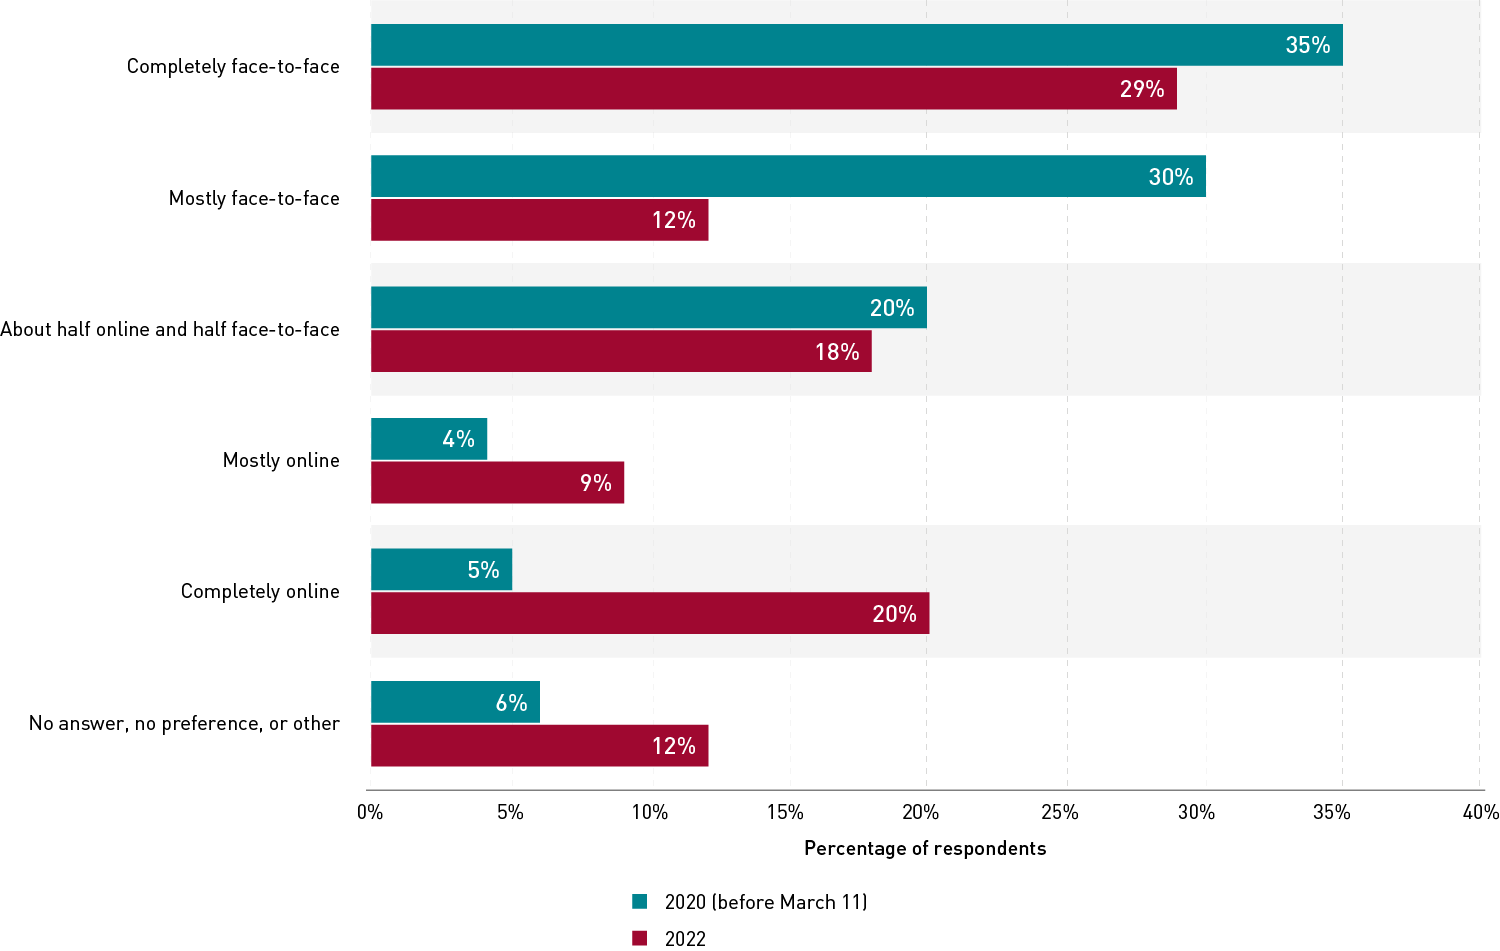 Double bar chart comparing respondents' modality preferences in 2020 (before March 11) and 2022. Preferences for completely or mostly face-to-face decreased. Preferences for completely or mostly online increased. For example, in 2020 only 5% of respondents said they preferred completely online courses, but in 2022 20% of respondents said they preferred completely online courses.